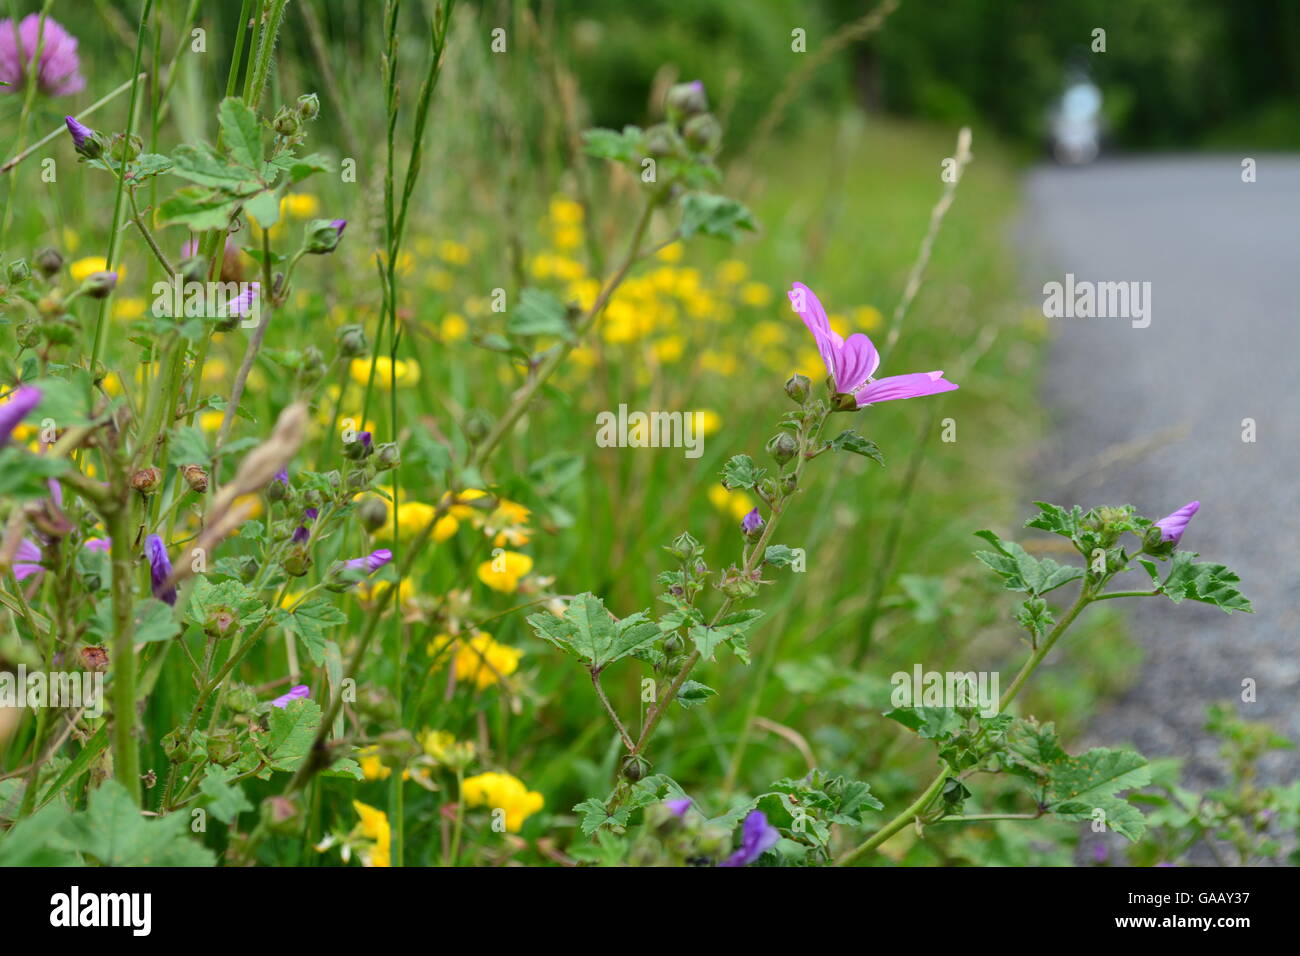 Roadside flowers, weeds and grass Stock Photo